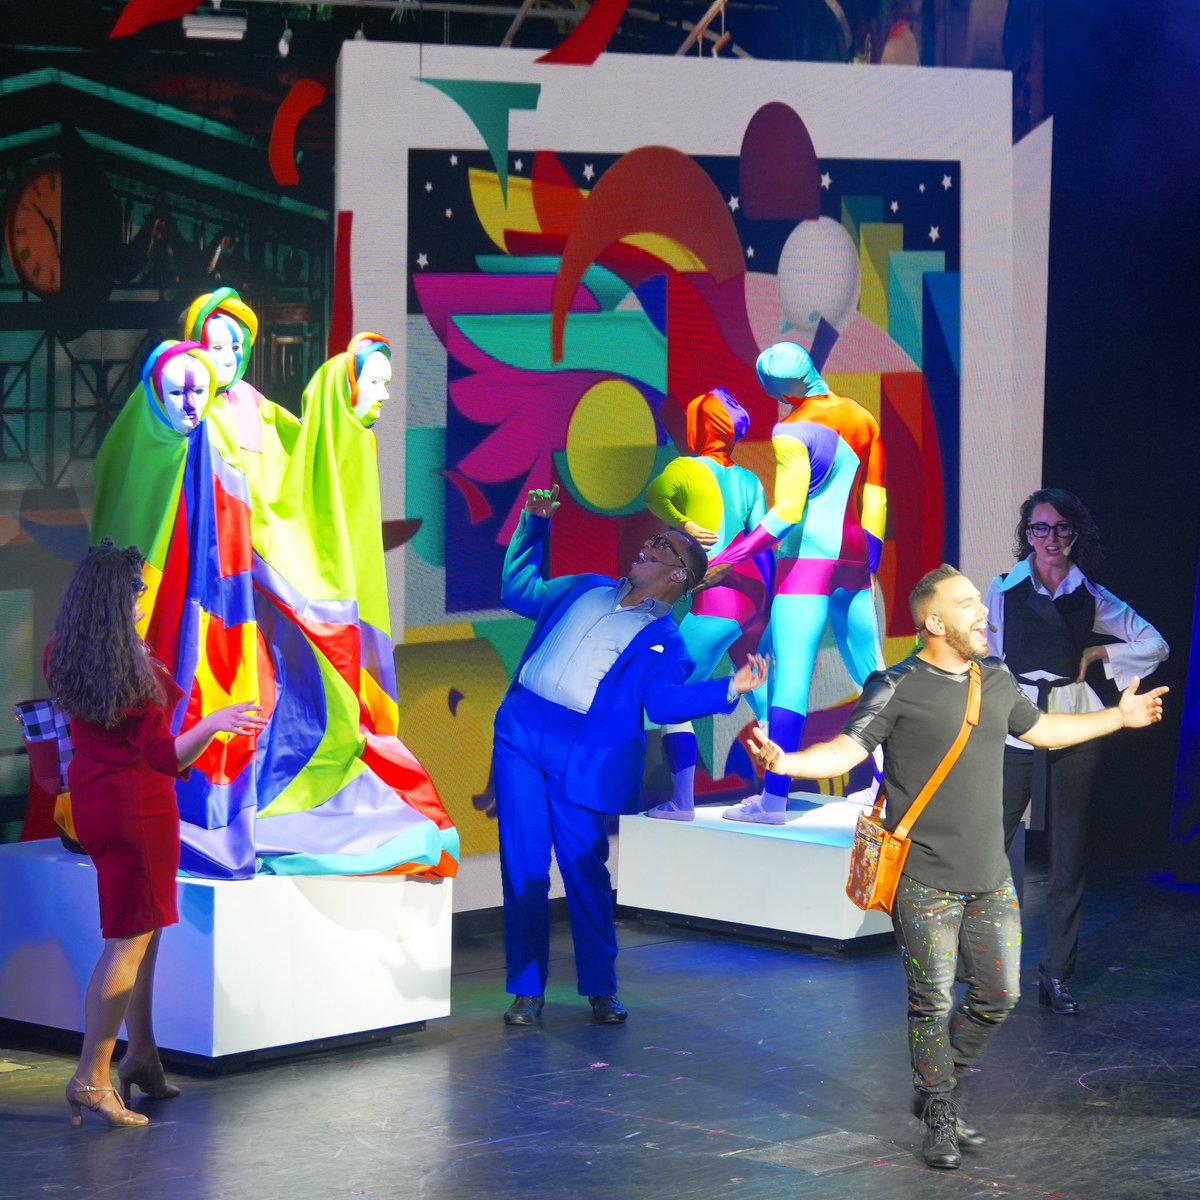 The fun and vibrant “Color My World” production show staged in Teatro Rosso aboard @CarnivalCruise #CarnivalFirenze #CarnivalFunItalianStyle #CruiseTravel #Cruise #Travel